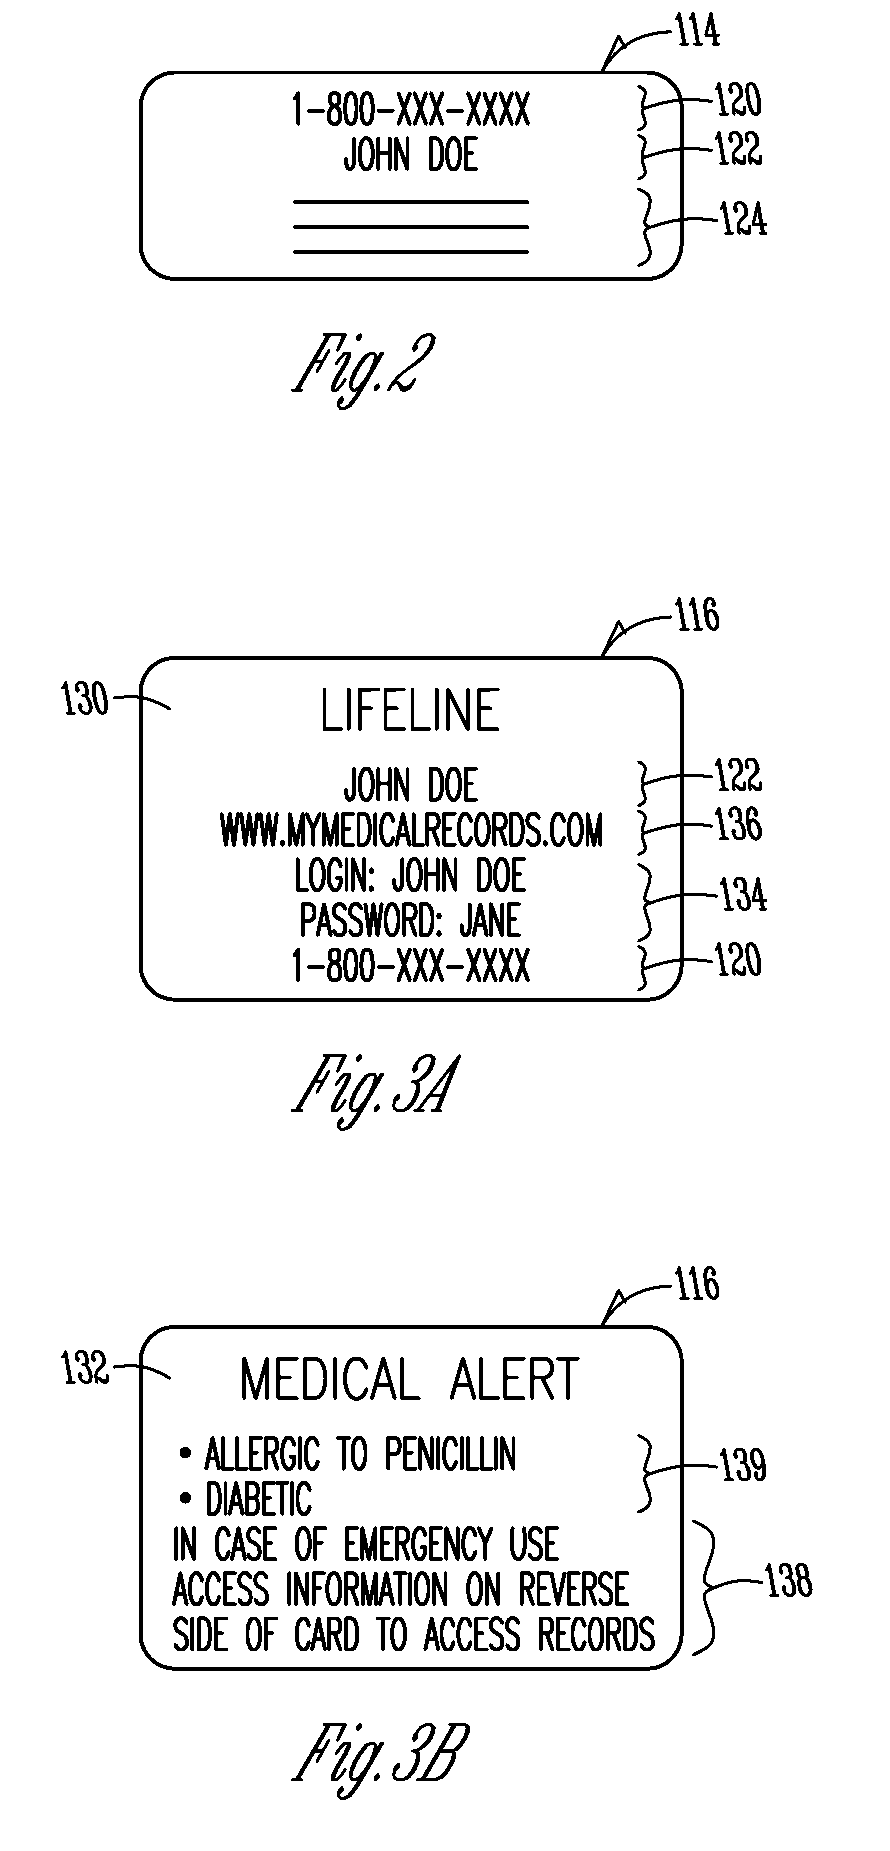 Method and system for providing online medical records with emergency password feature